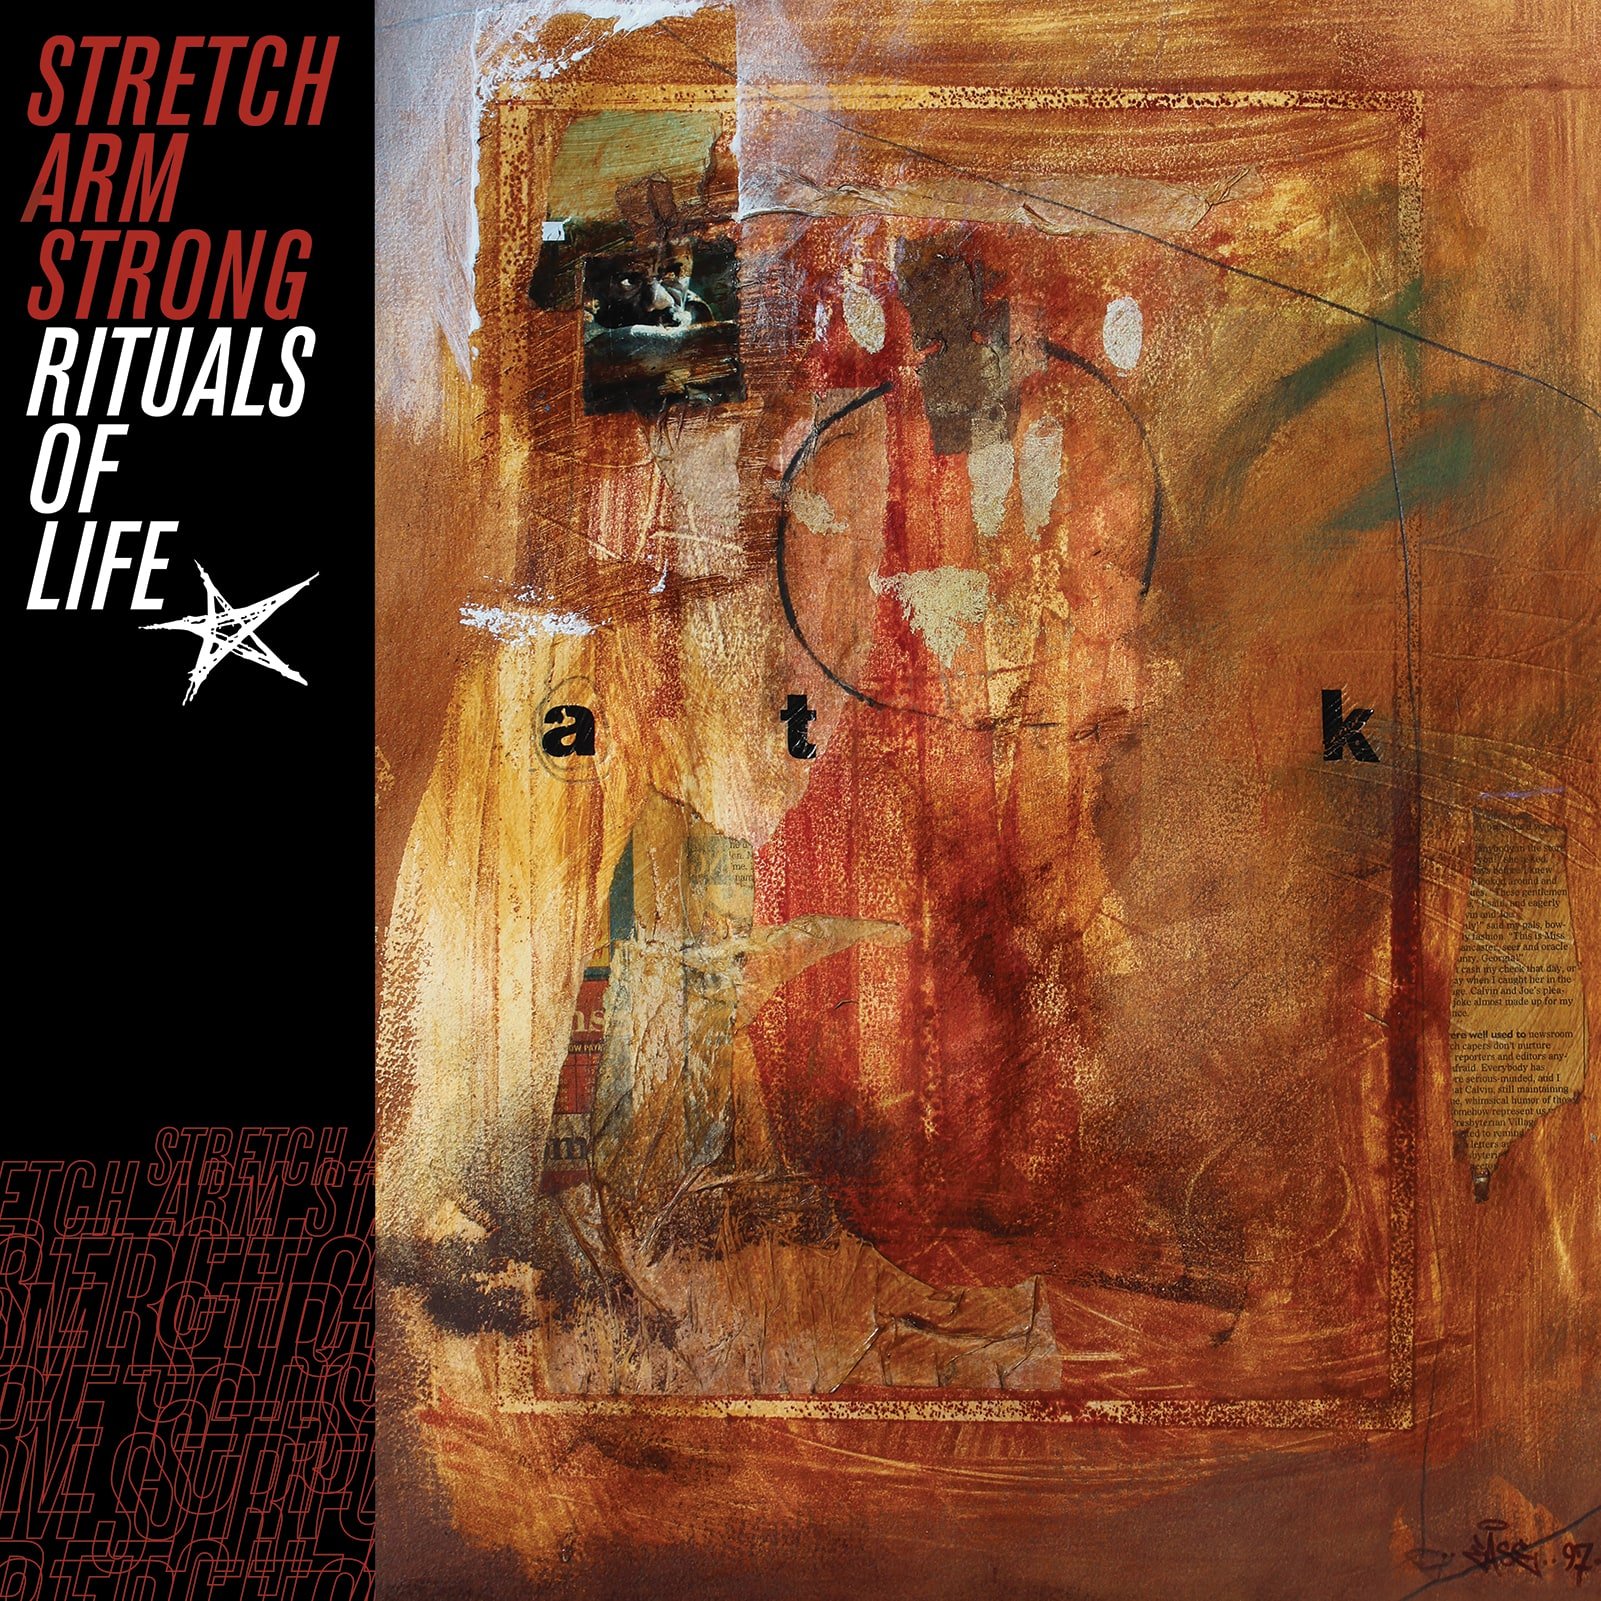 Stretch Arm Strong - Rituals of Life - Cover.jpg